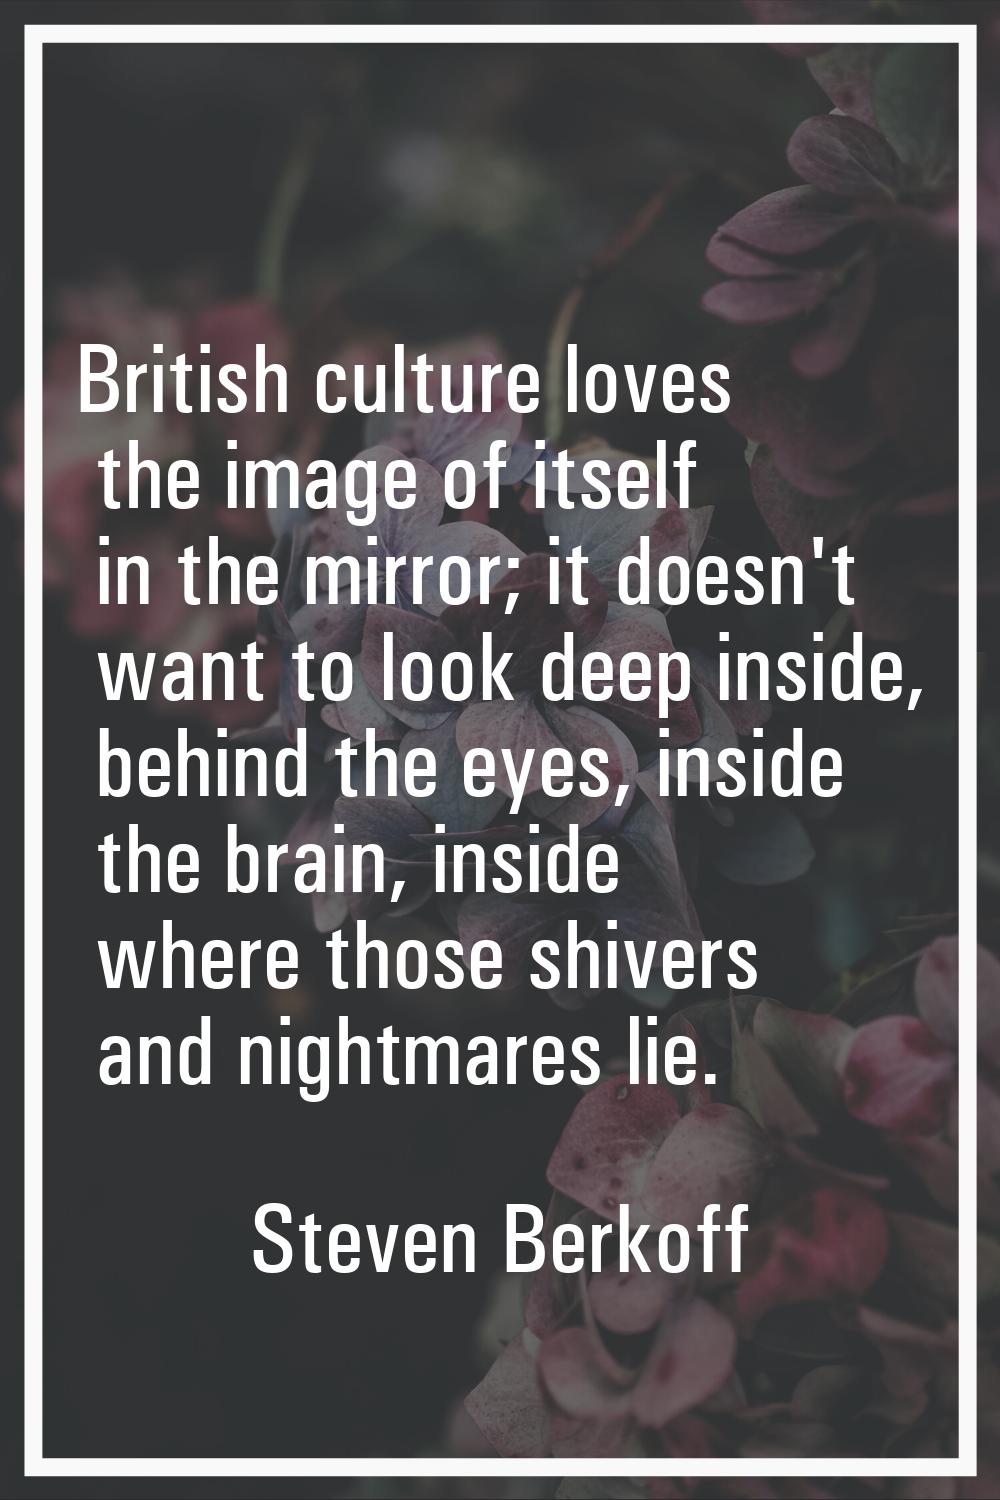 British culture loves the image of itself in the mirror; it doesn't want to look deep inside, behin